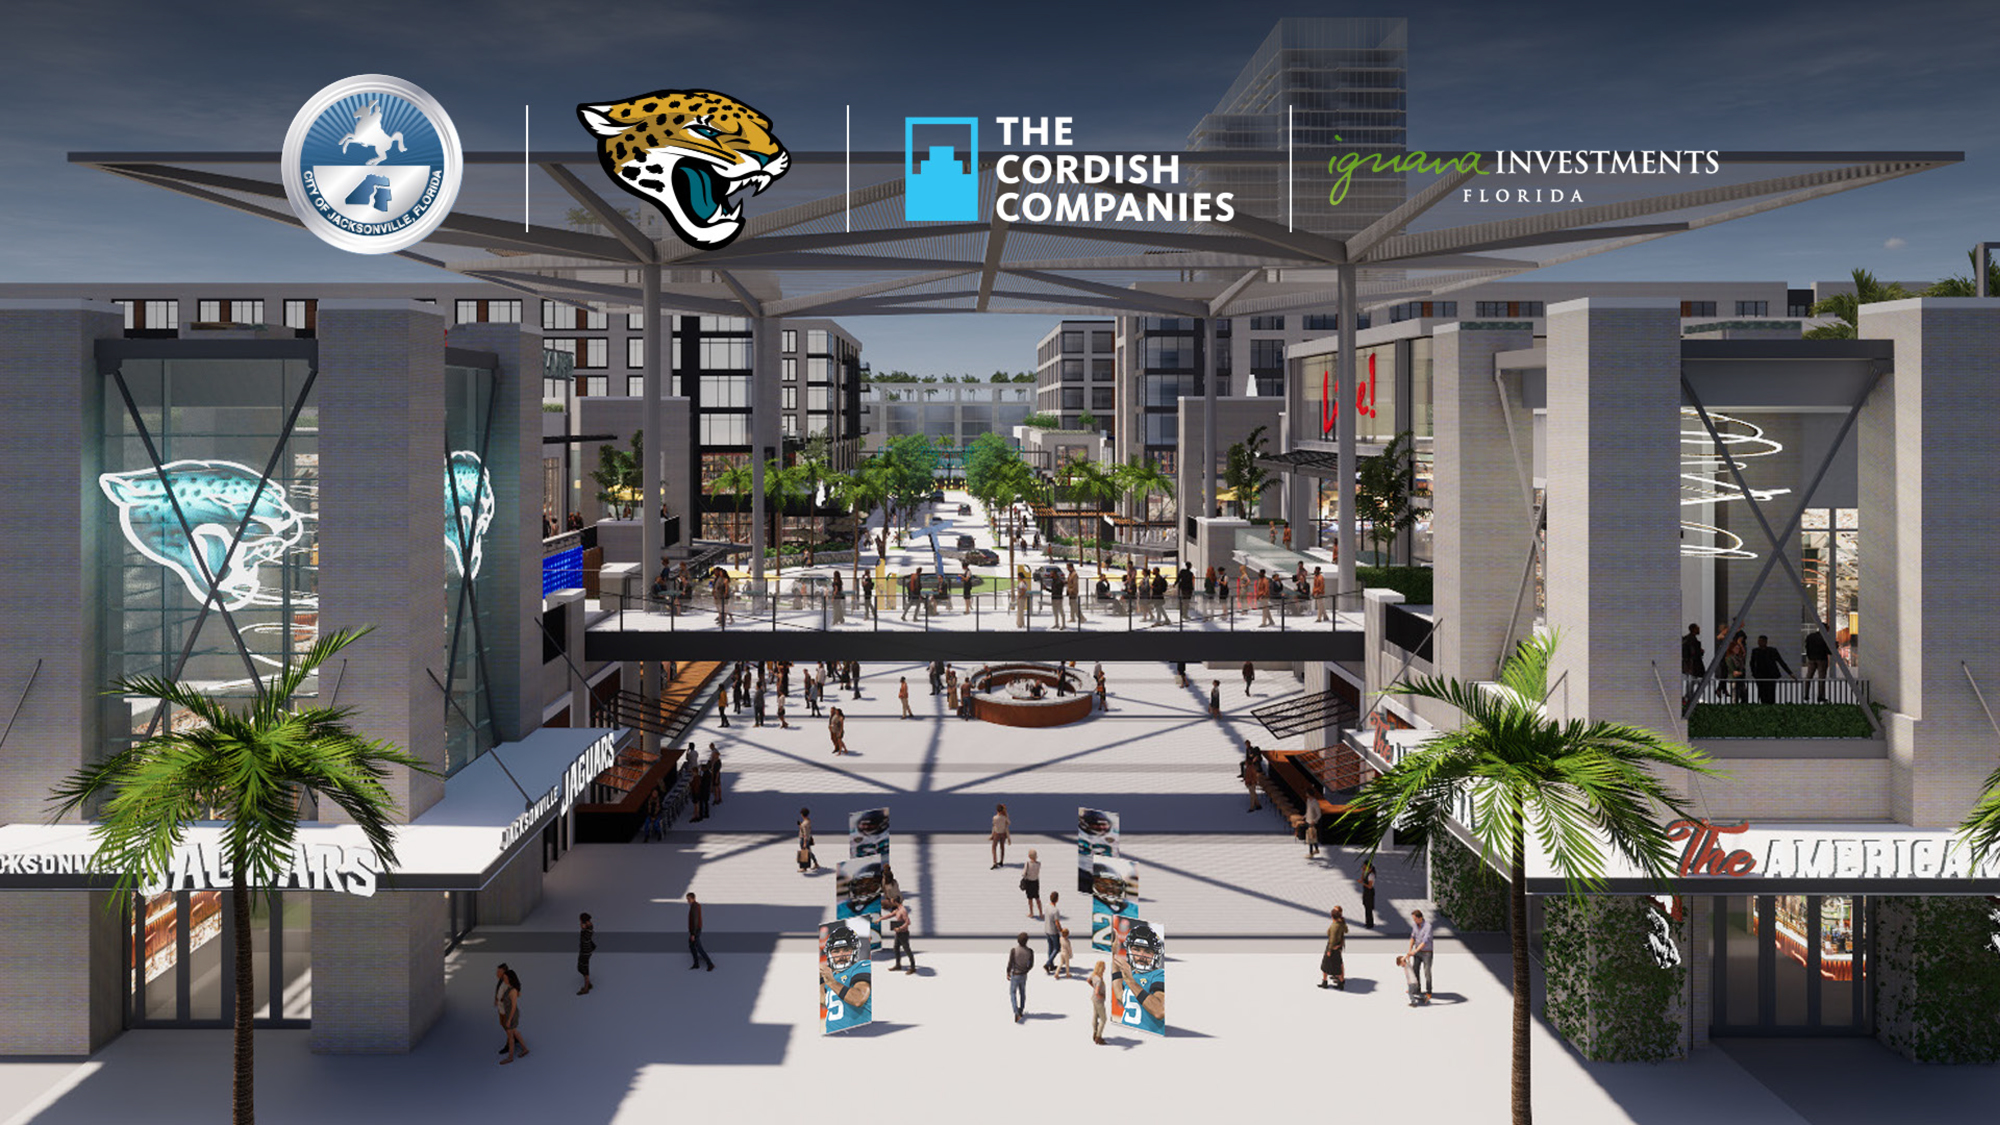 Project partners include the city, the Jacksonville Jaguars and The Cordish Companies and Iguana Investments.